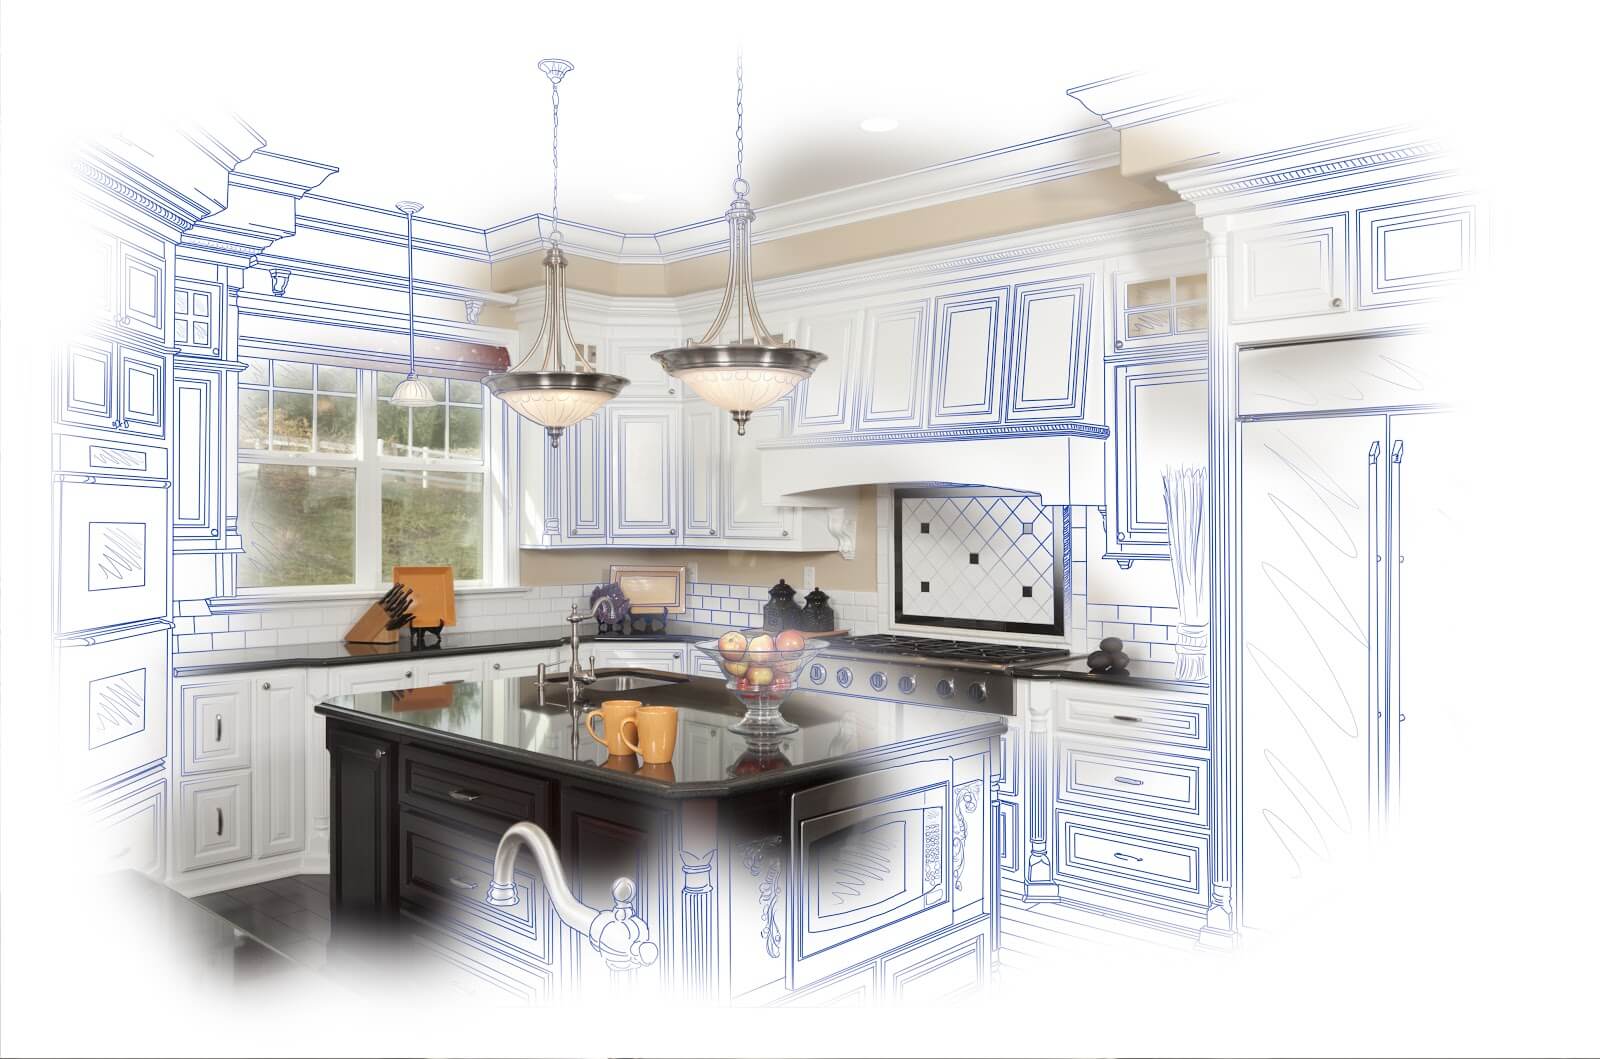 Remodeling plans laid over a photo of a kitchen